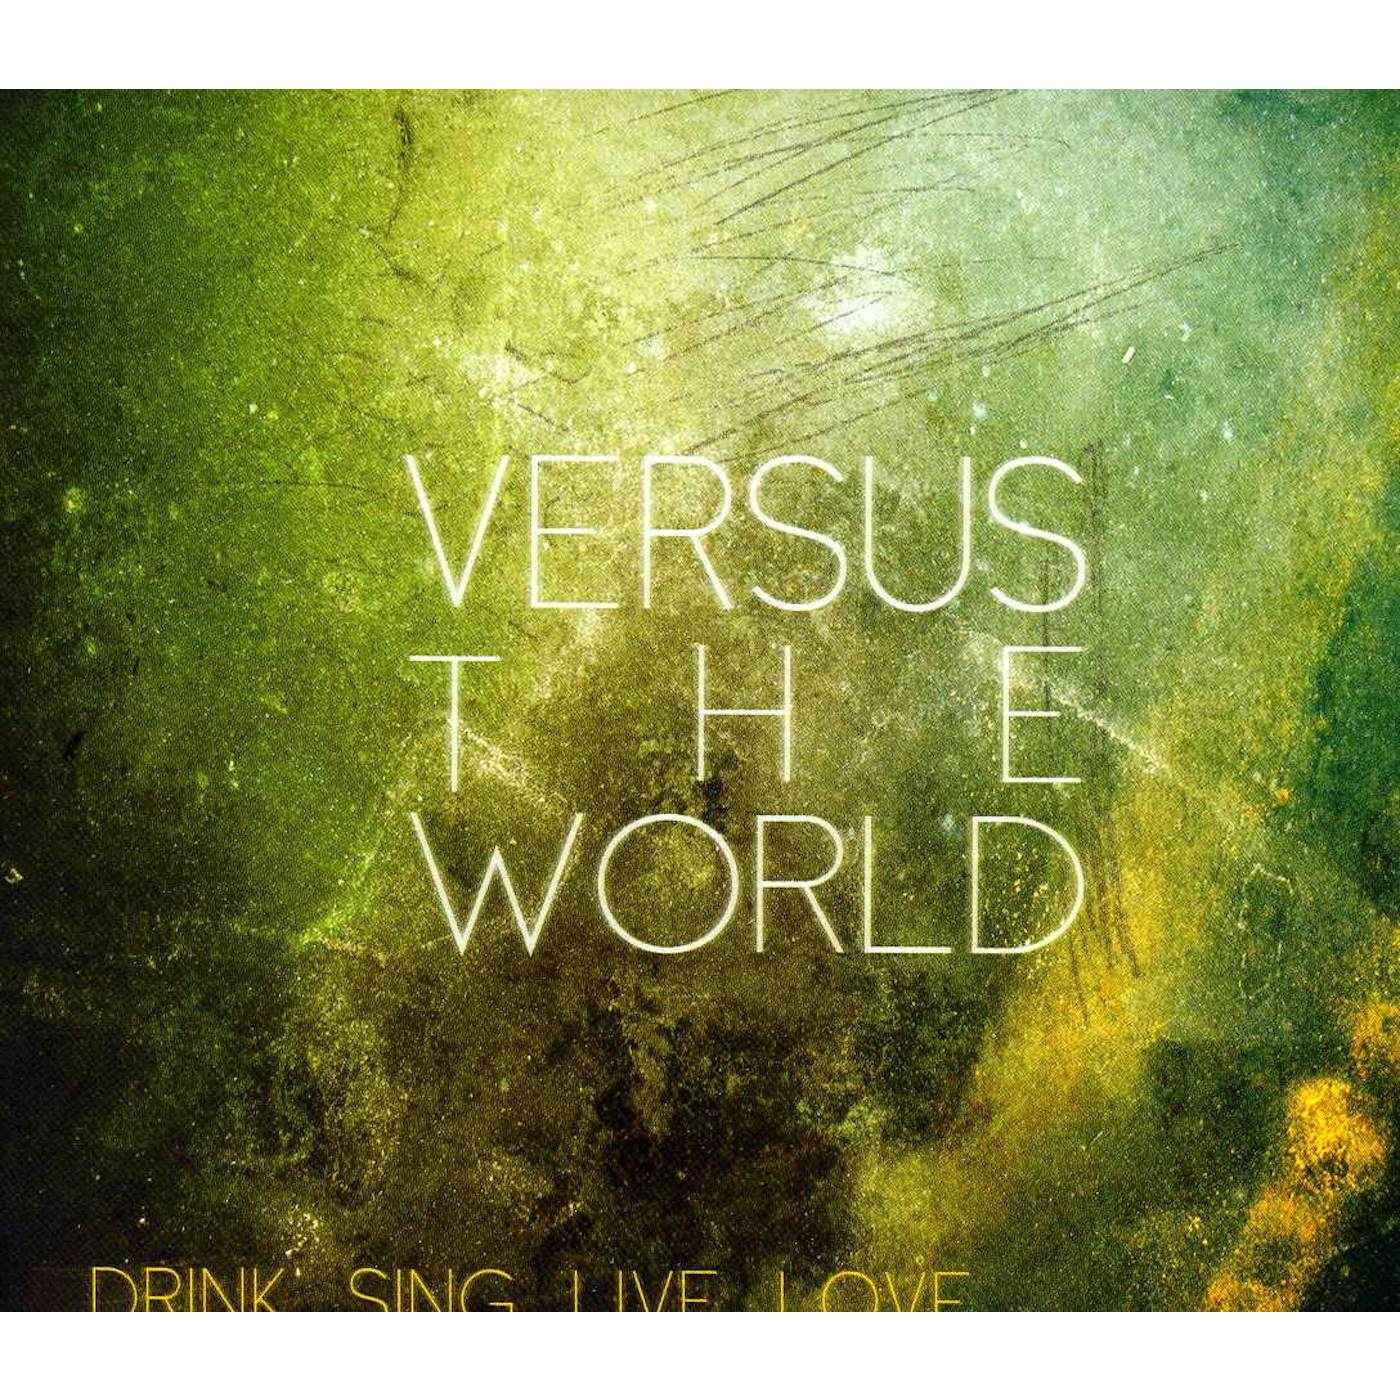 Versus The World DRINK SING LIVE LOVE CD